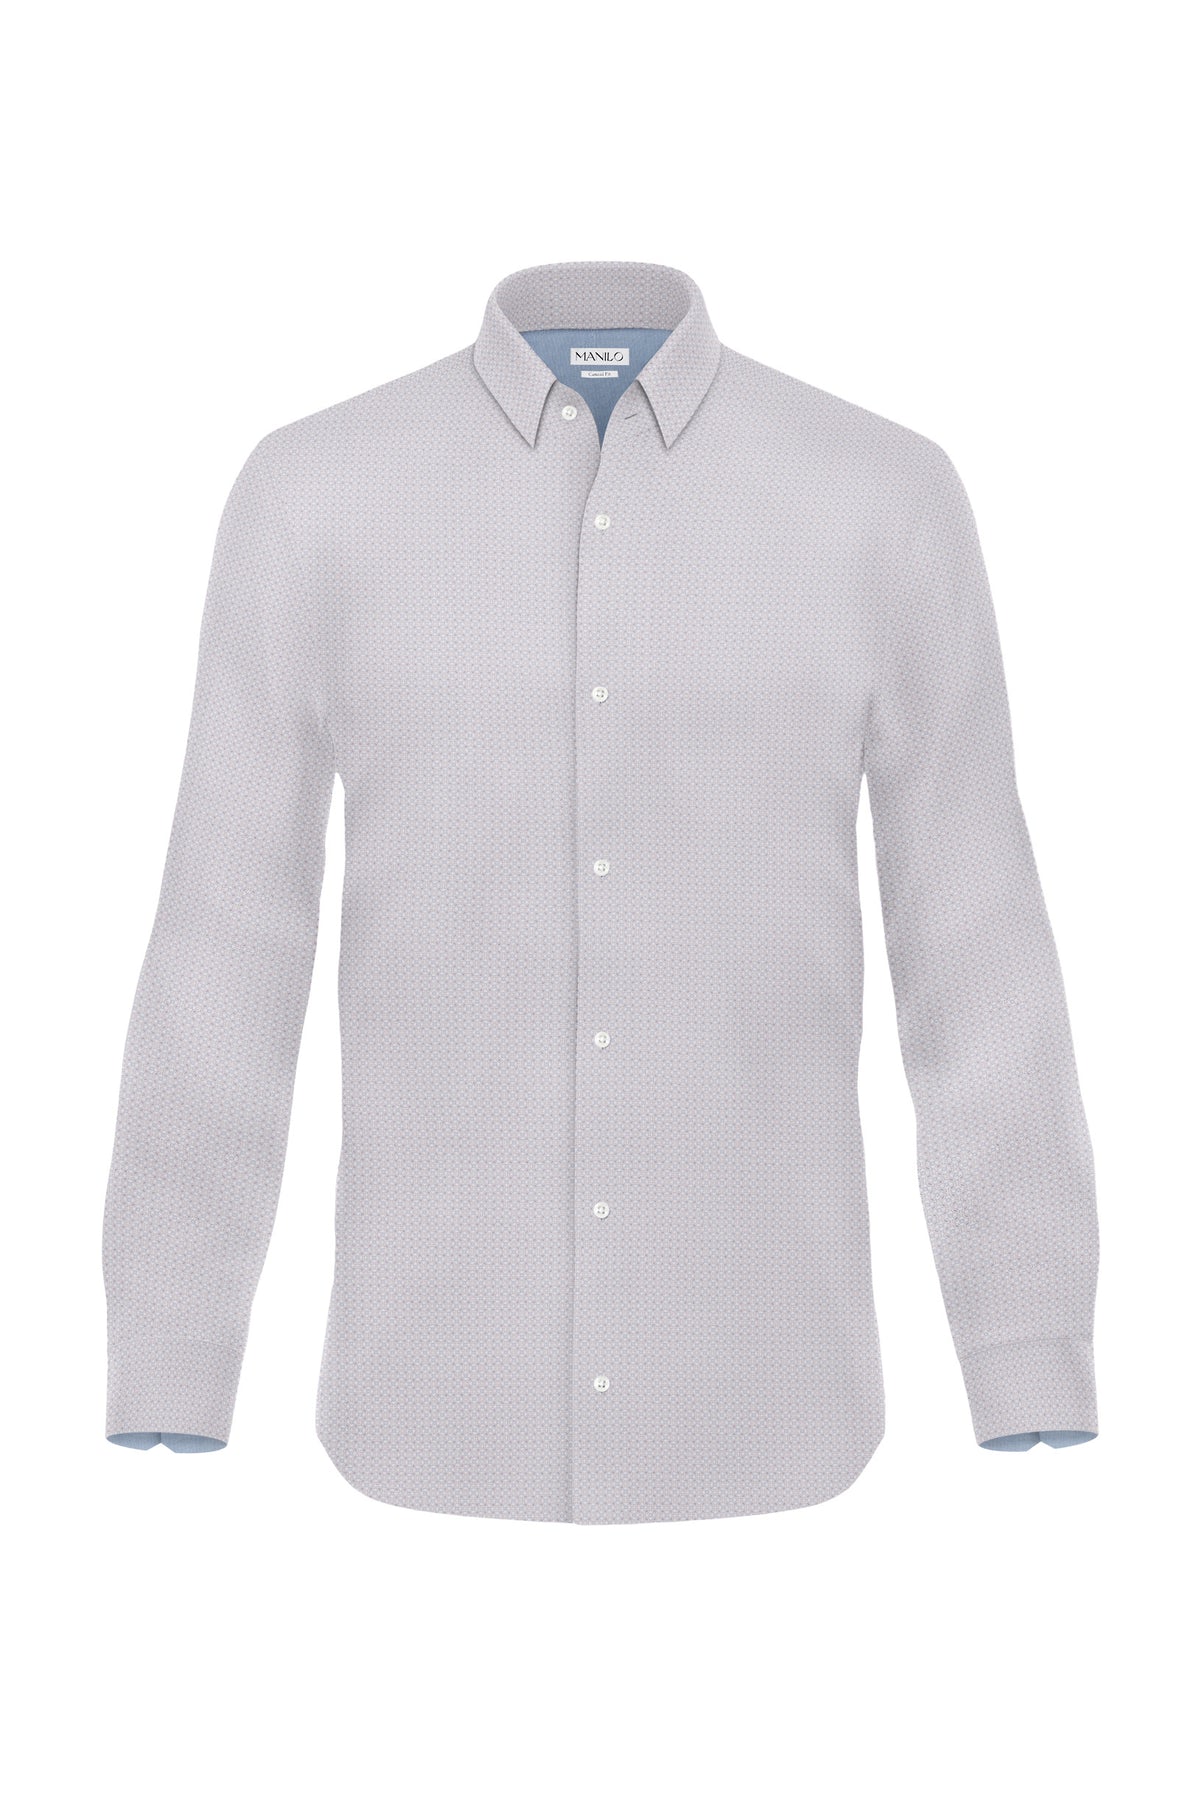 Casual shirt with graphic pattern in light gray (Art. 2240-C)